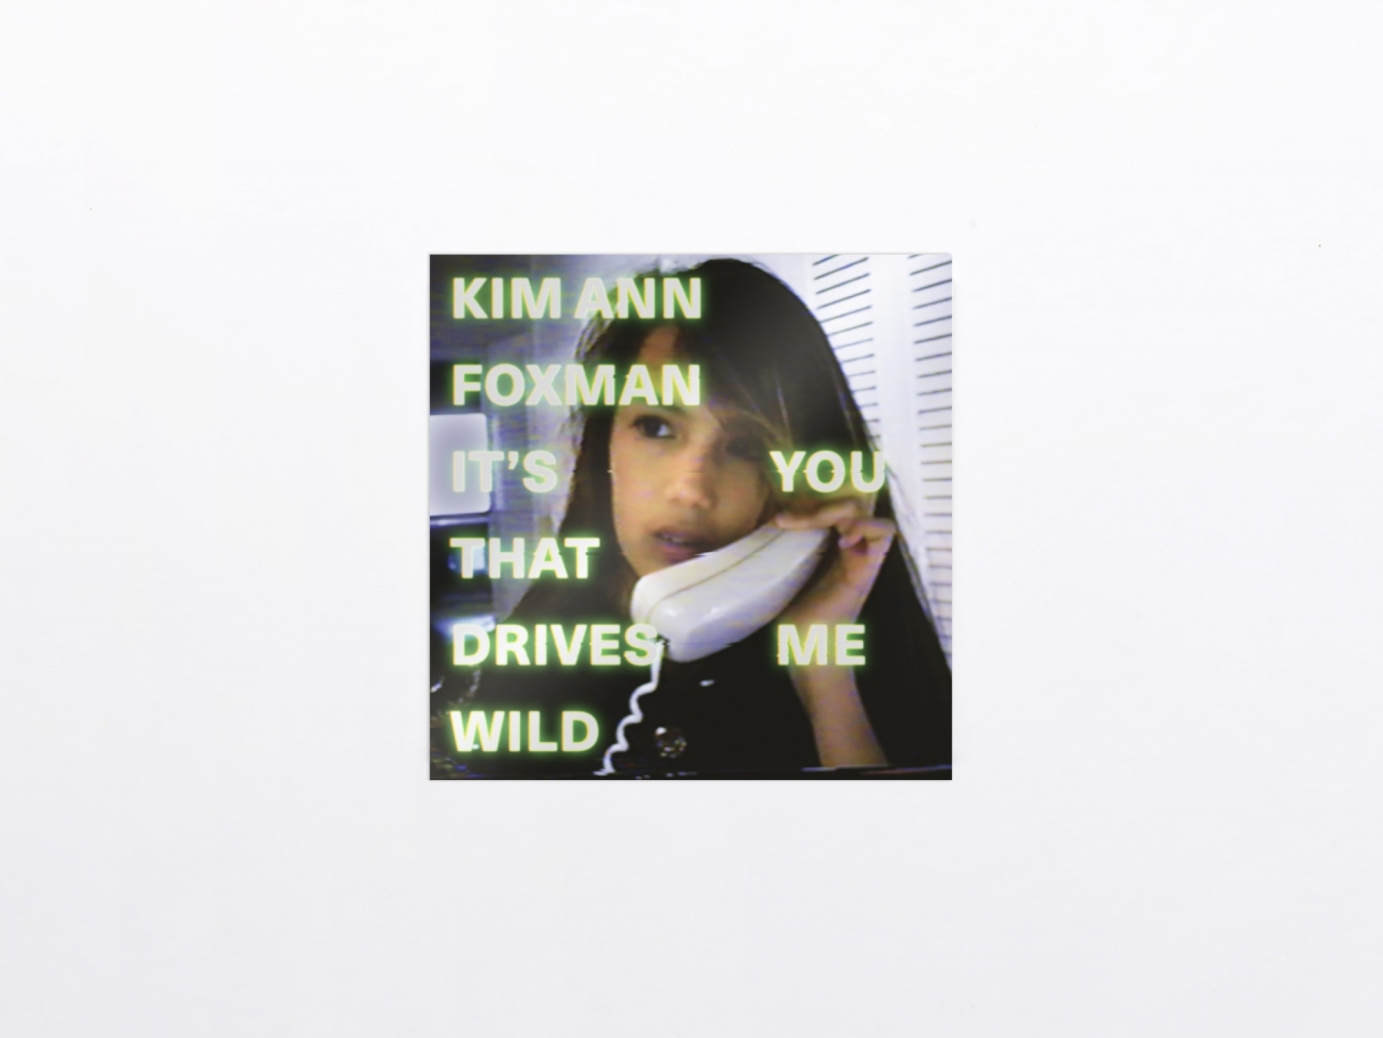 Creative direction and graphic design for Kim Ann Foxman by StudioPensom